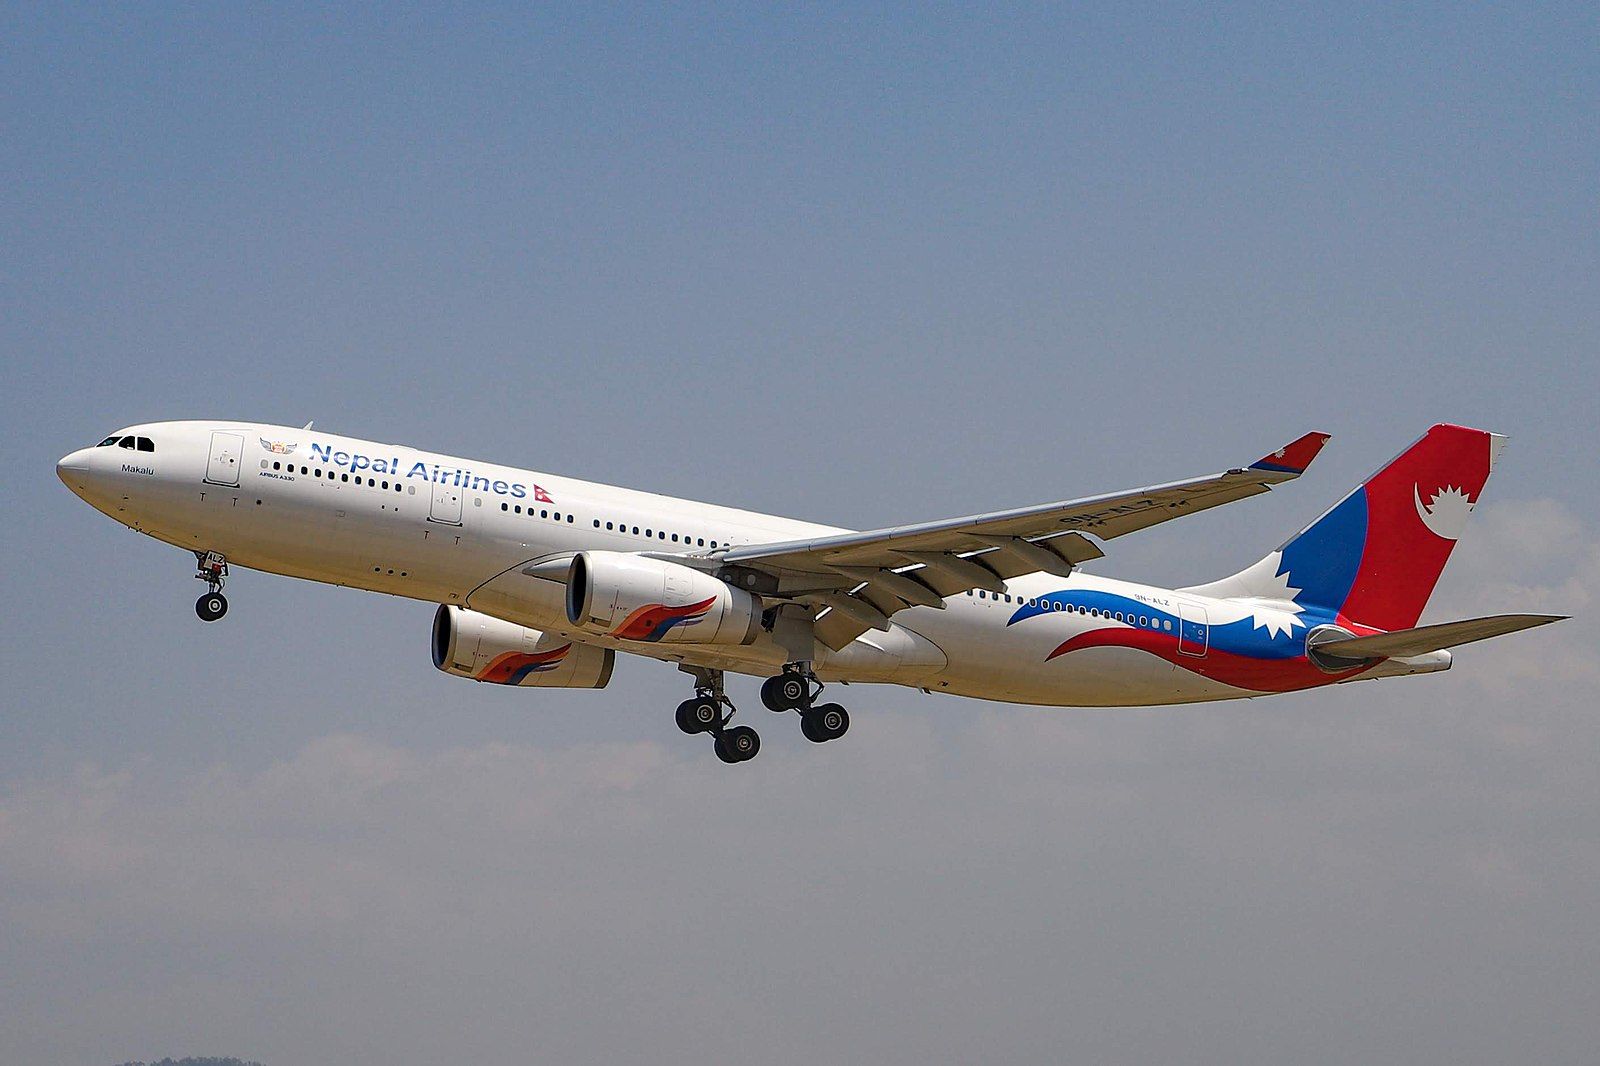 Nepal Airlines A330 on approach